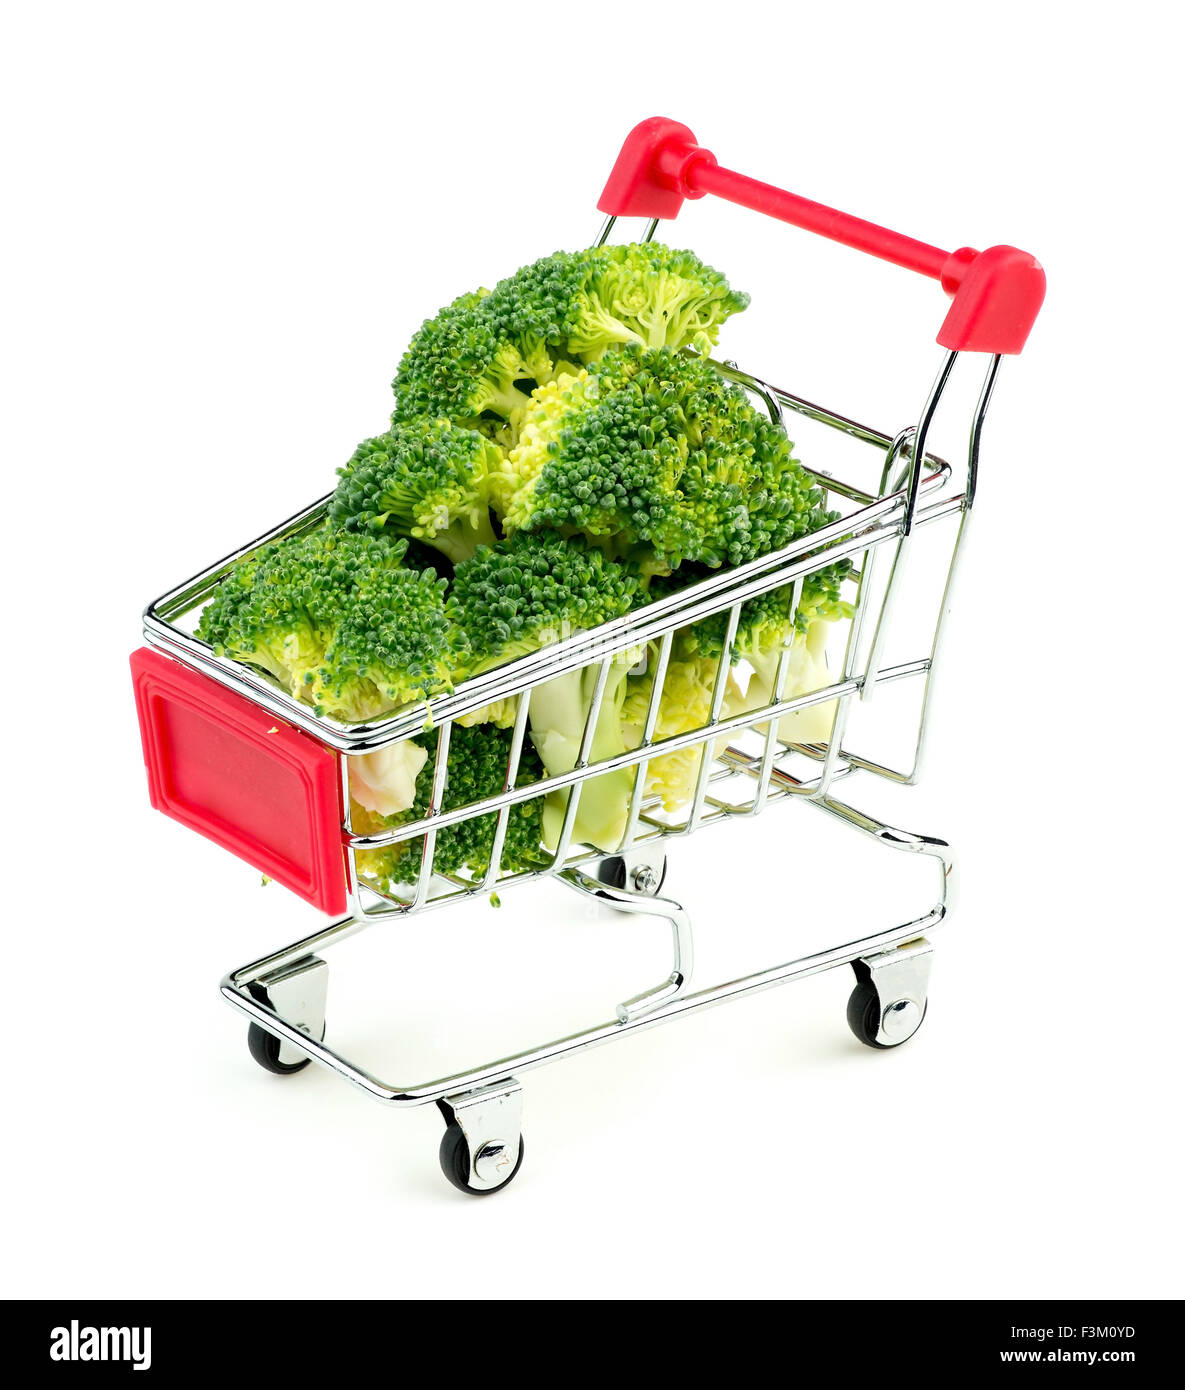 Broccoli florets in shopping cart Stock Photo